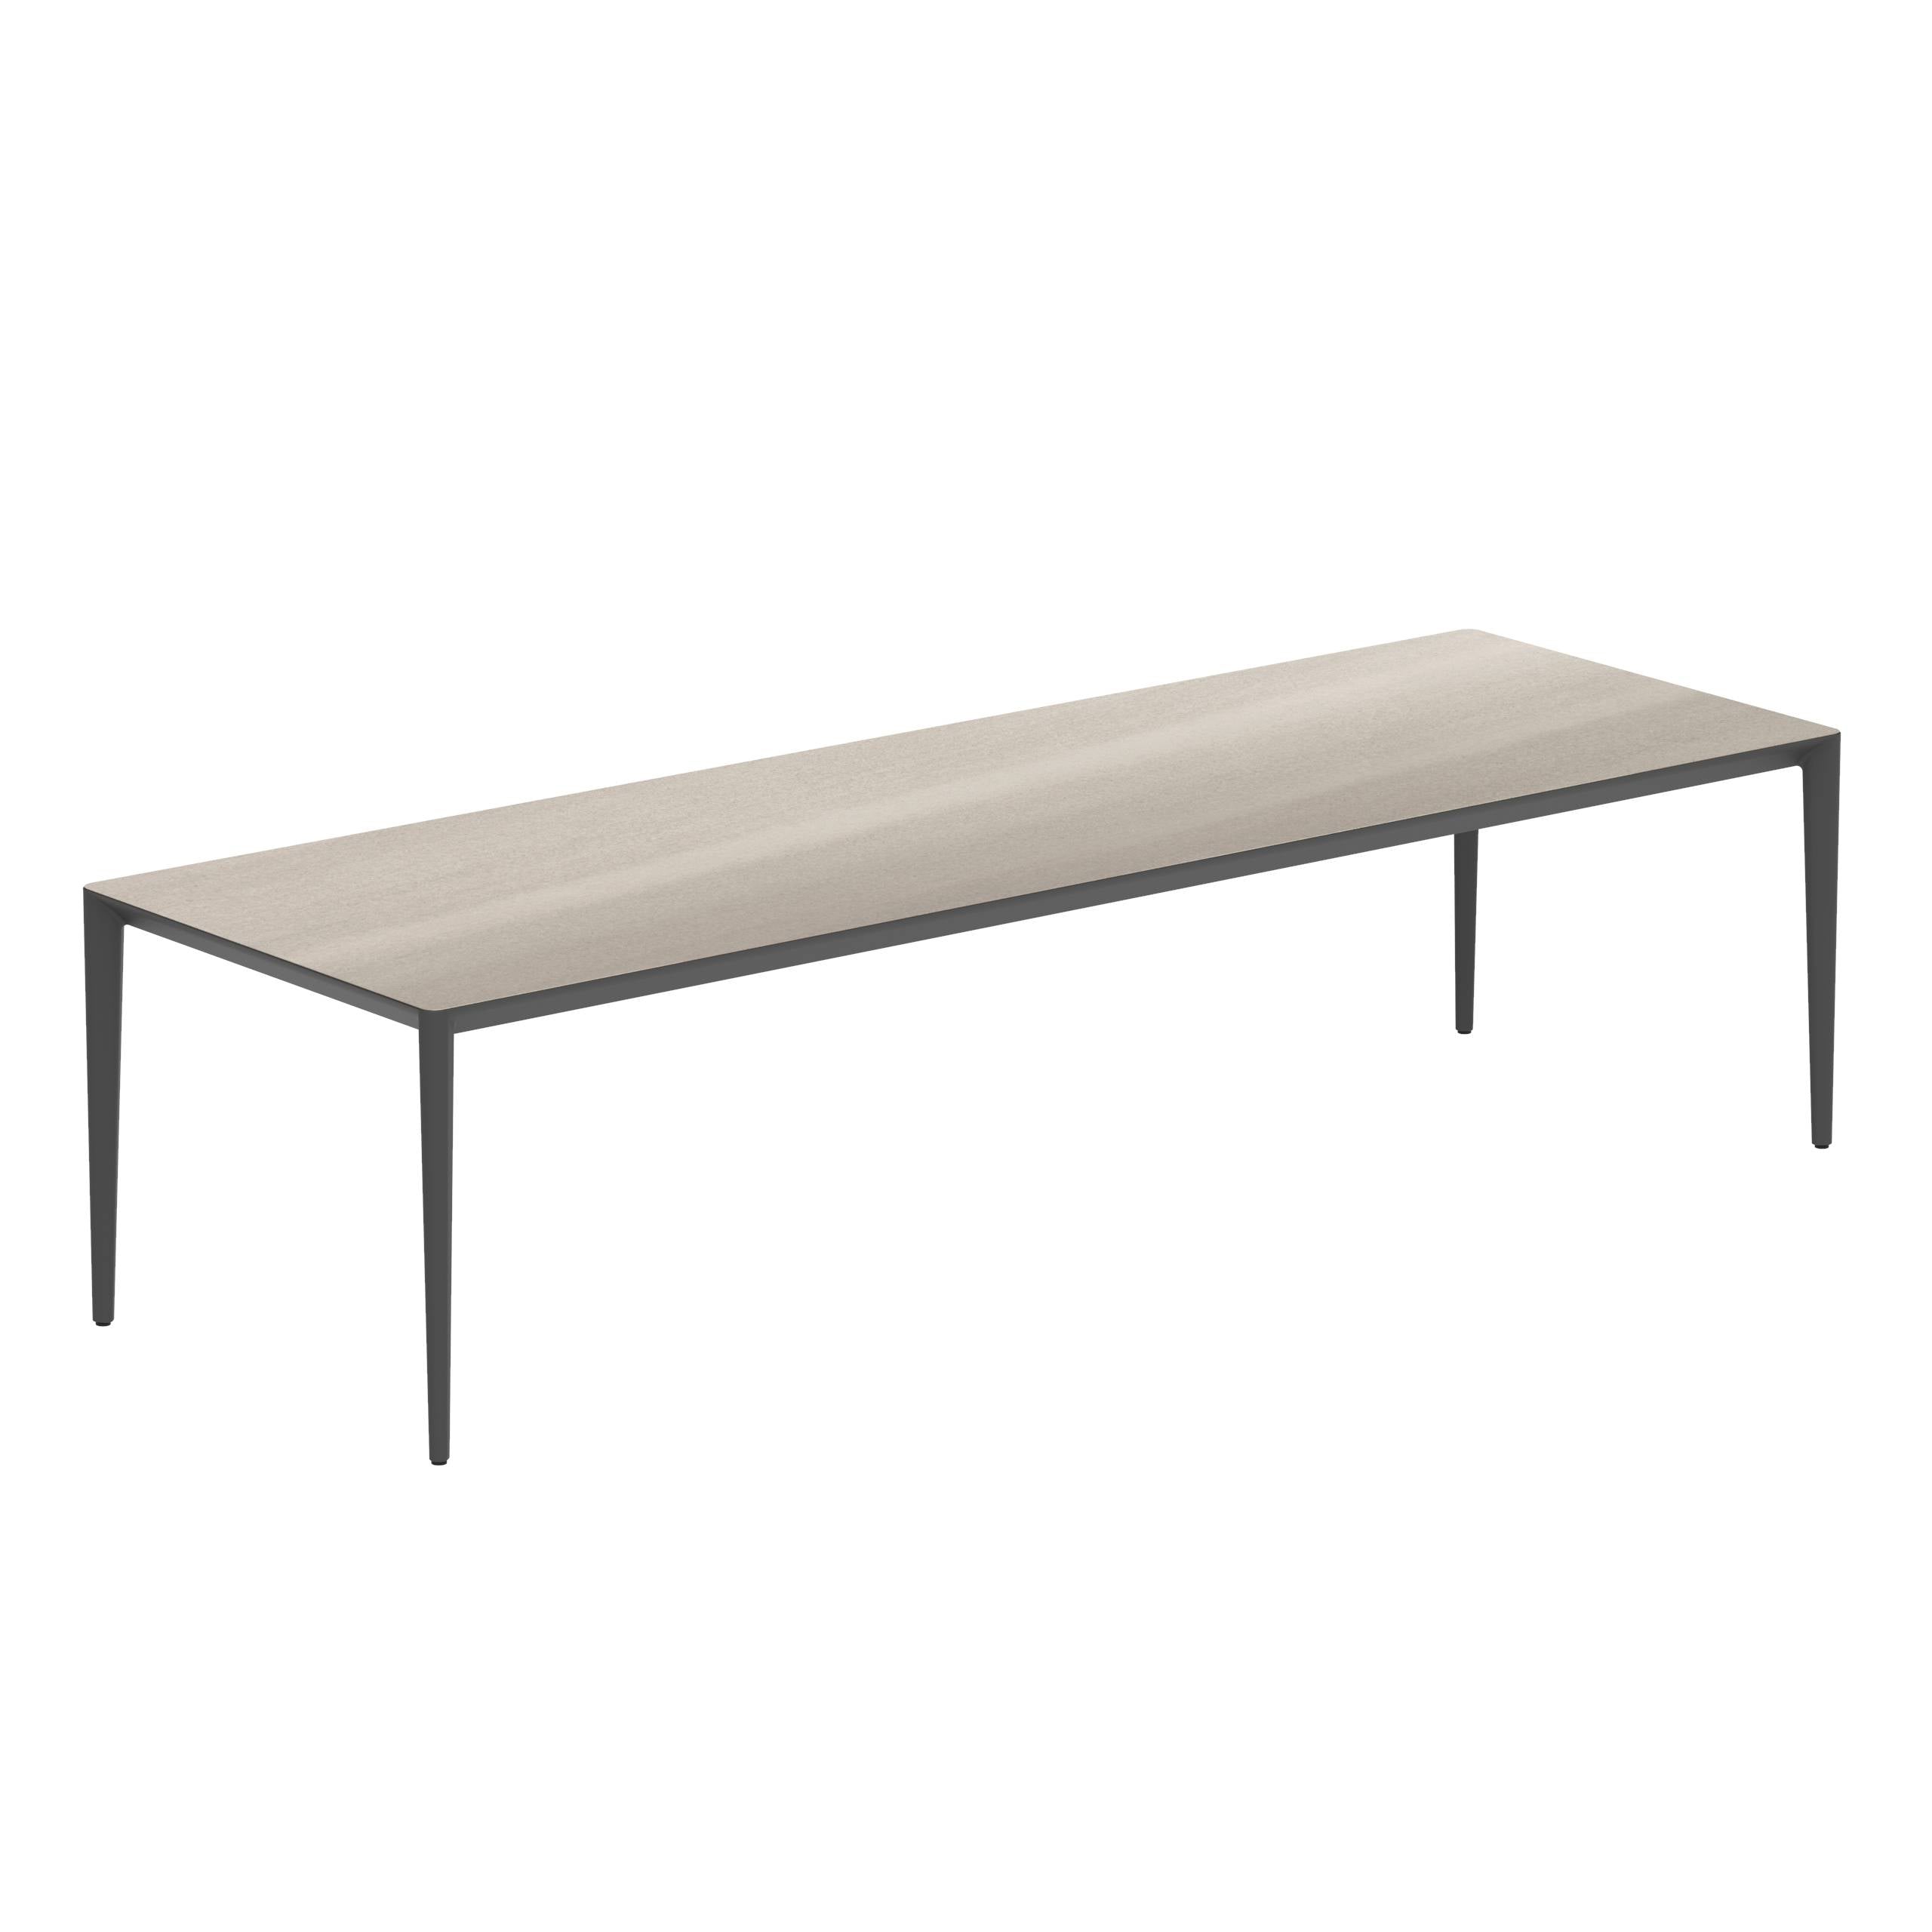 U-Nite Table 300x100cm Anthracite With Ceramic Tabletop In Taupe Grey